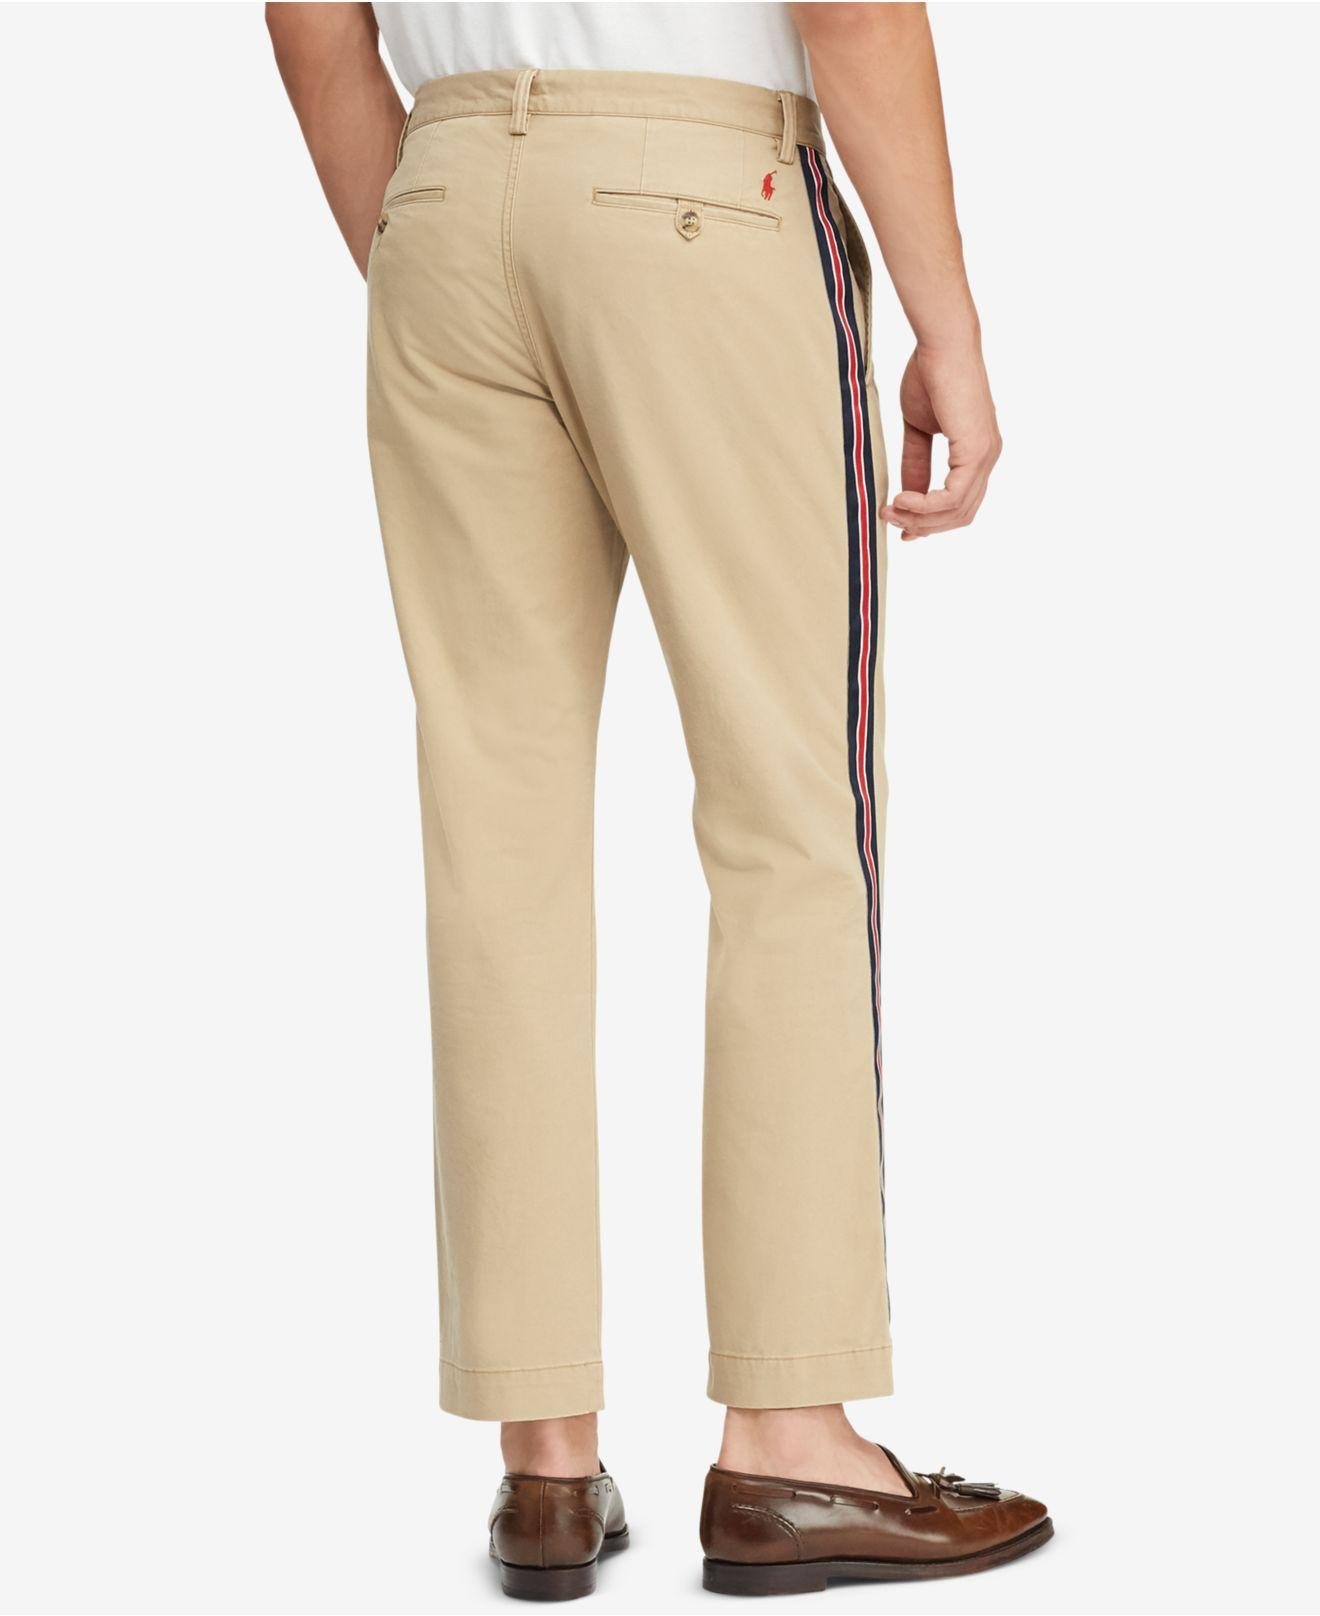 polo ralph lauren men's stretch straight fit bedford chino pants